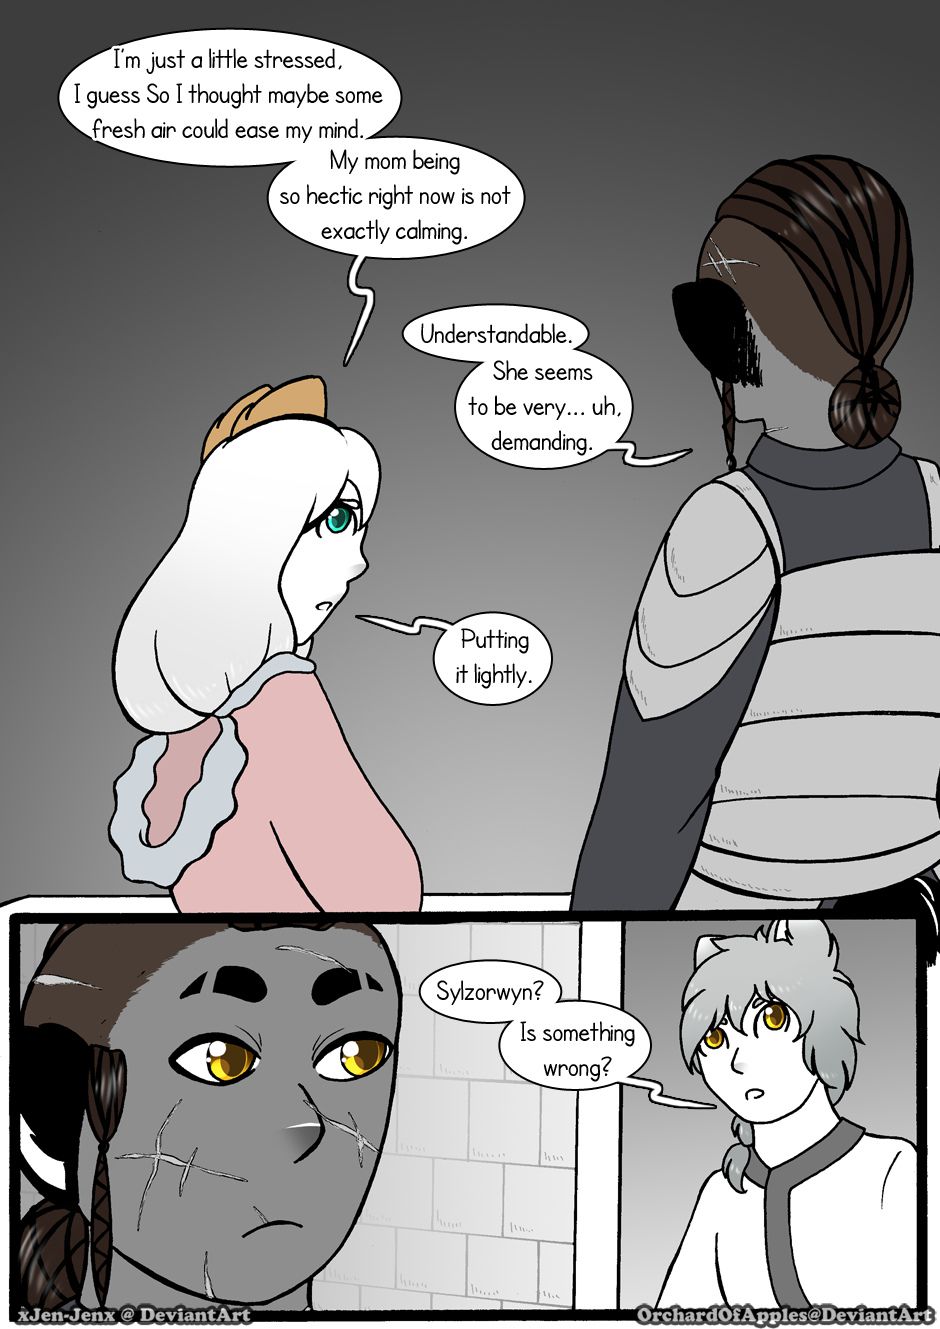 [Jeny-jen94] Between Kings and Queens [Ongoing] 237